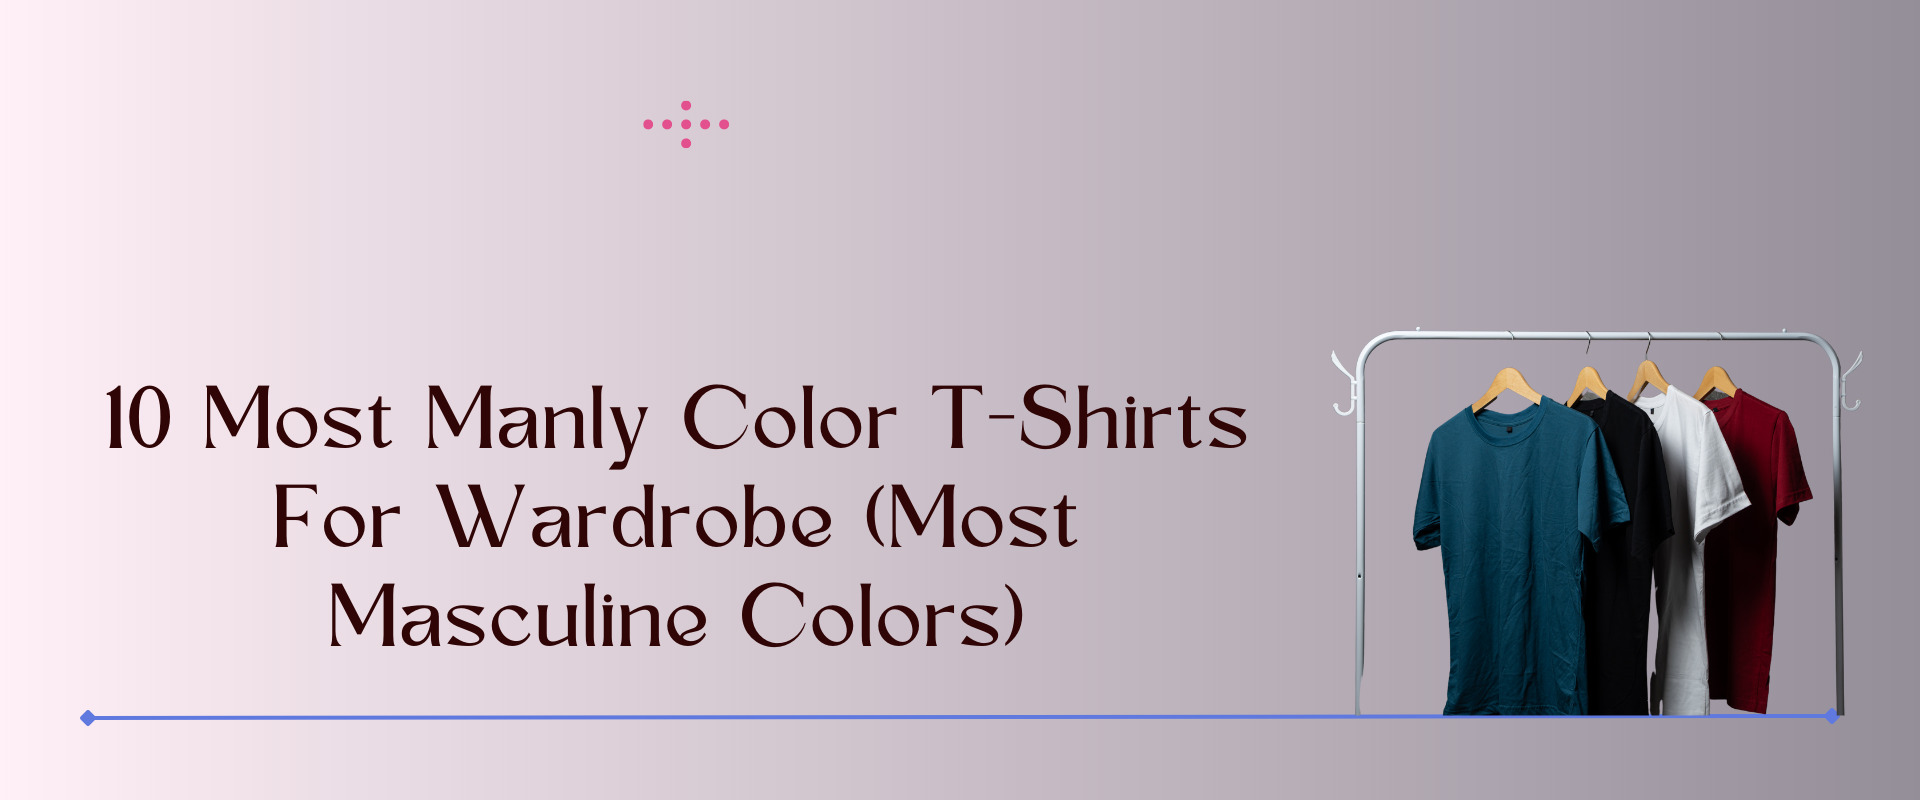 10 Most Manly Color T-Shirts For Wardrobe (Most Masculine Colors)